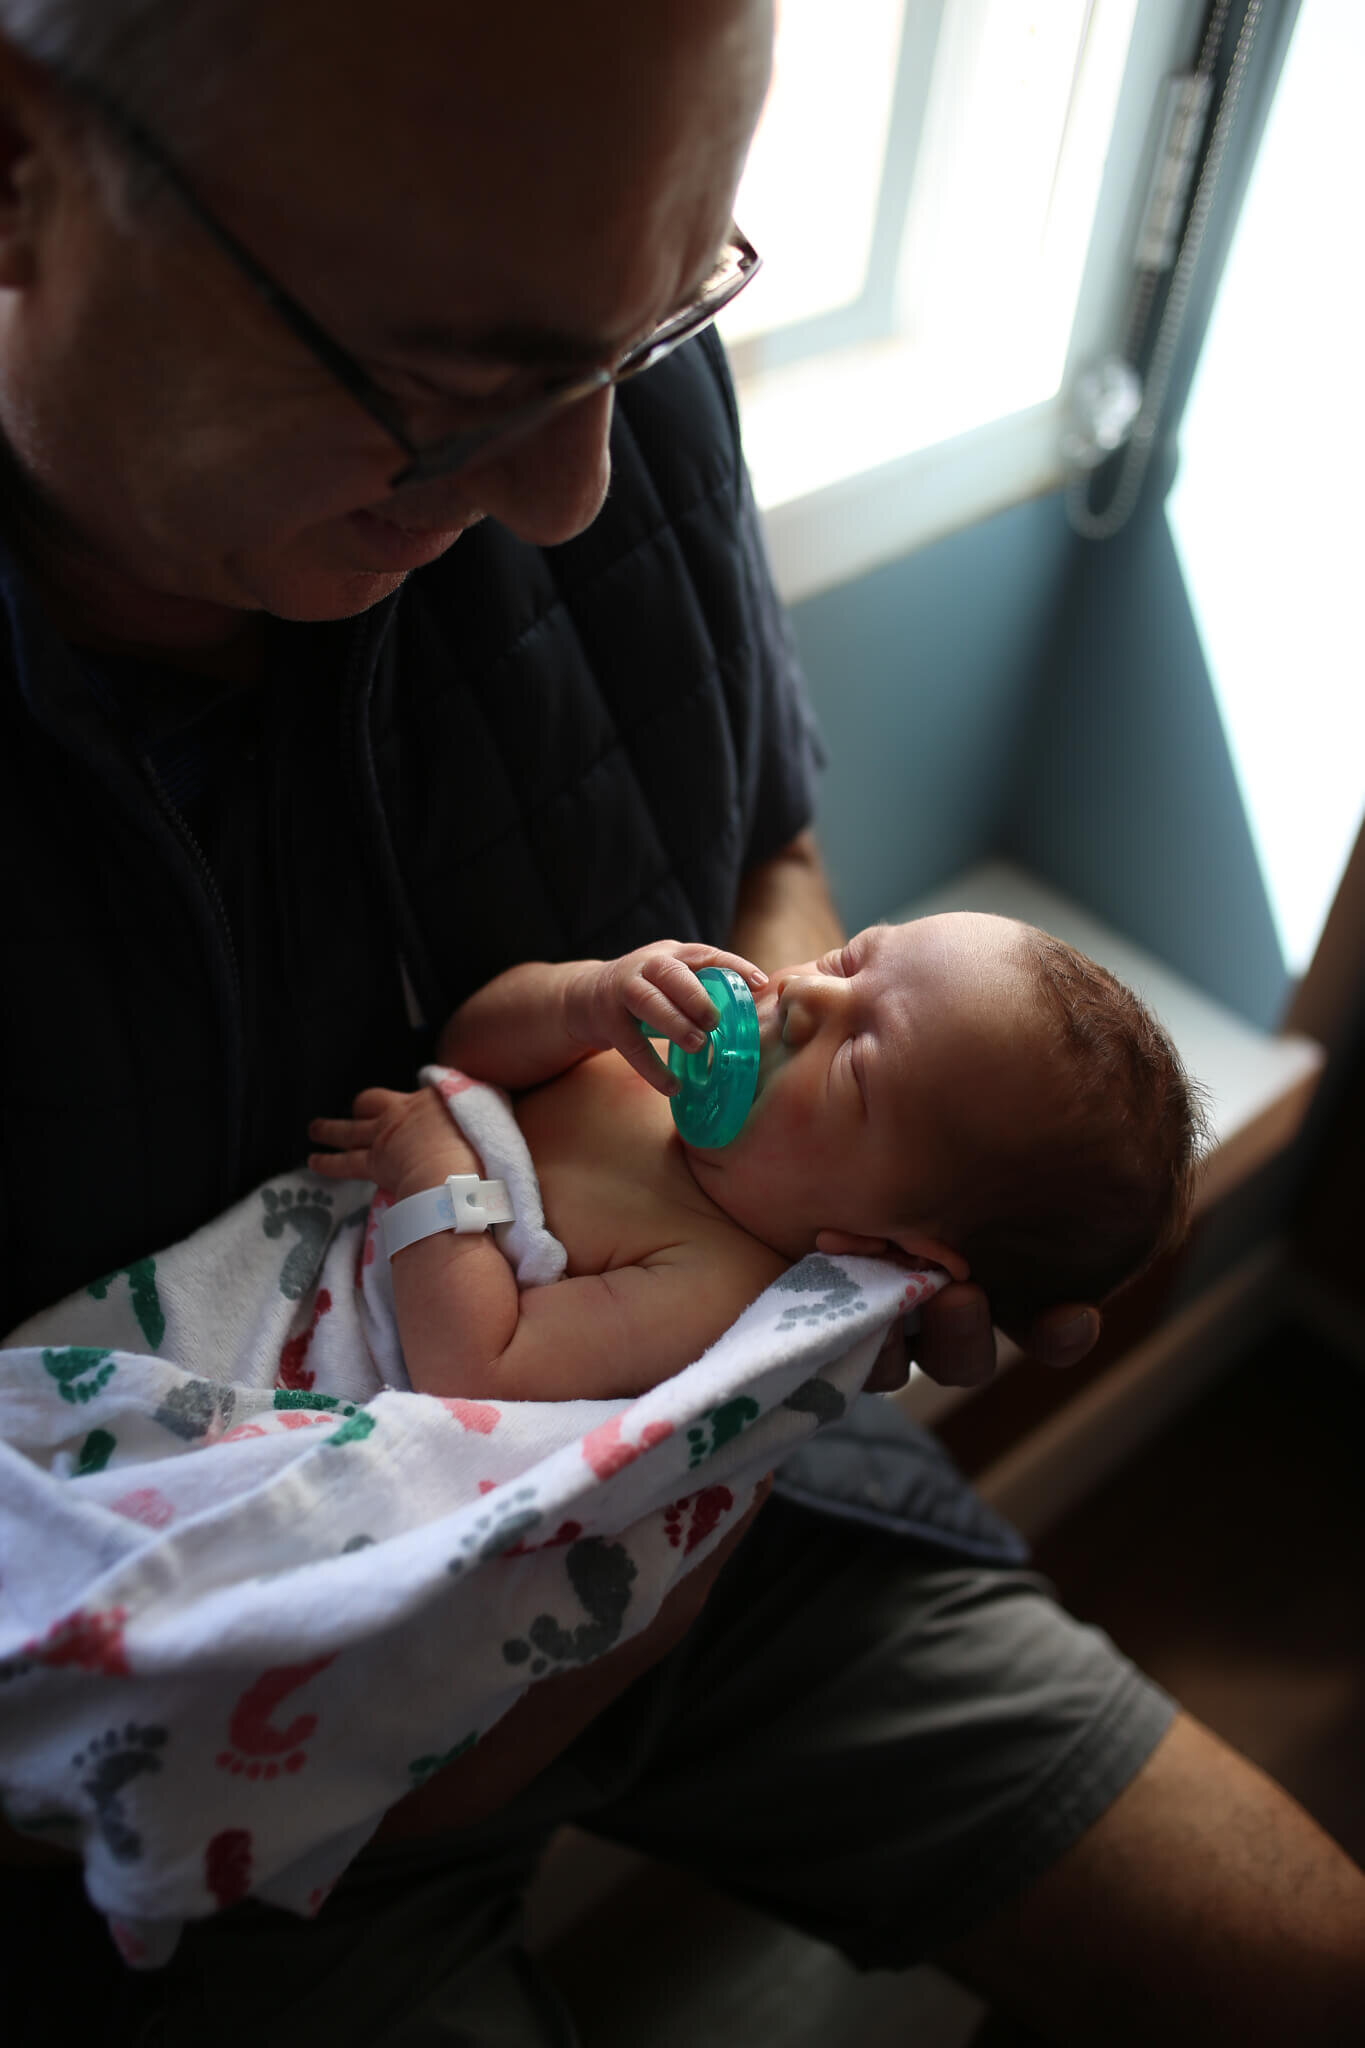  A picture of a new father holding his newborn child in his arms with the infant wrapped in a blanket and touching the pacifier in his mouth from a newborn session 